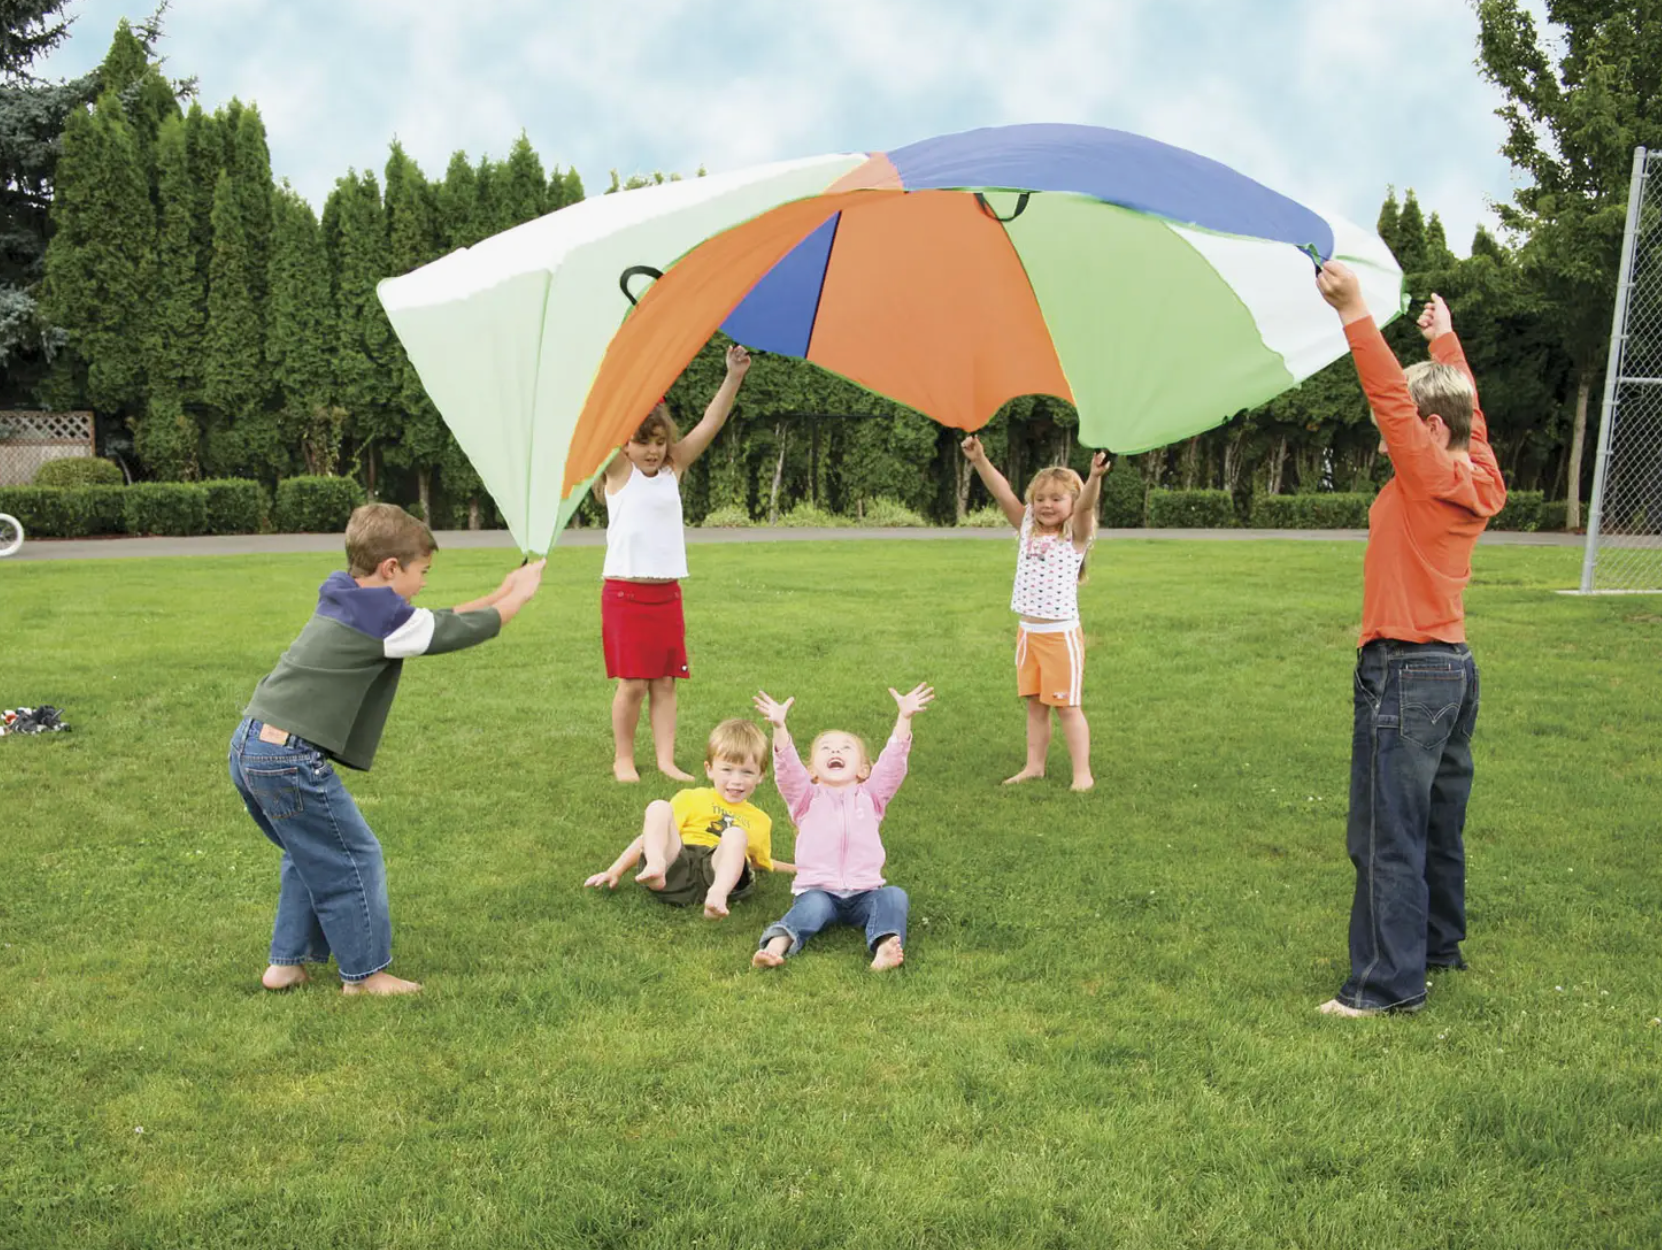 Children outside playing with 10-foot parachute.